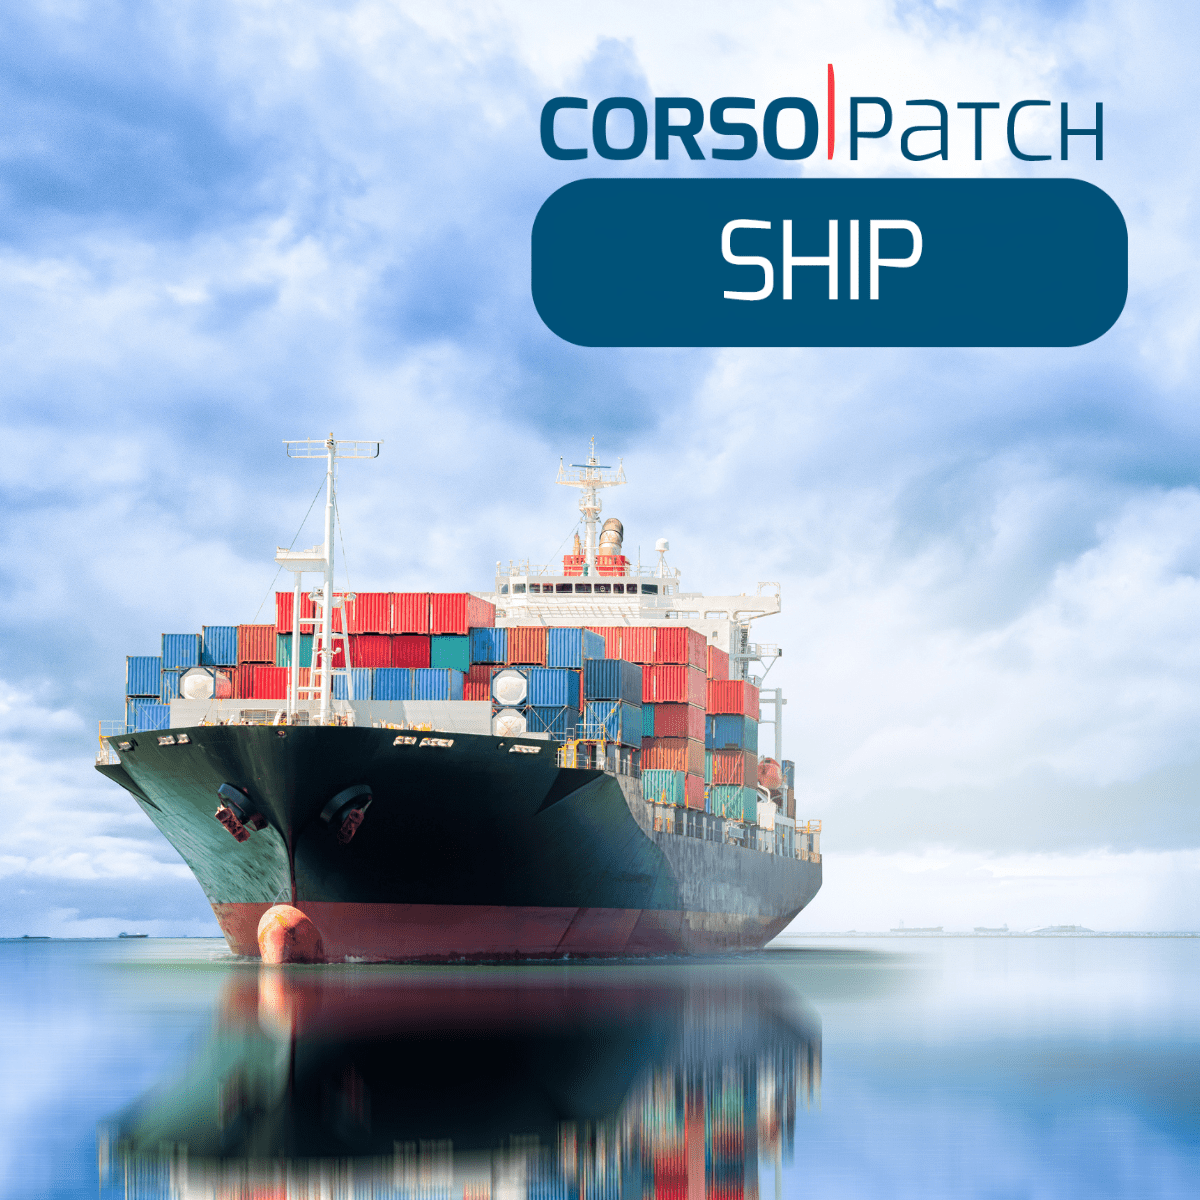 CorsoPatch Ship, derived from CorsoPatch Aircraft, is a repair solution for ship hulls. Applications are numerous, among them the application above water line (emerged part of ship).